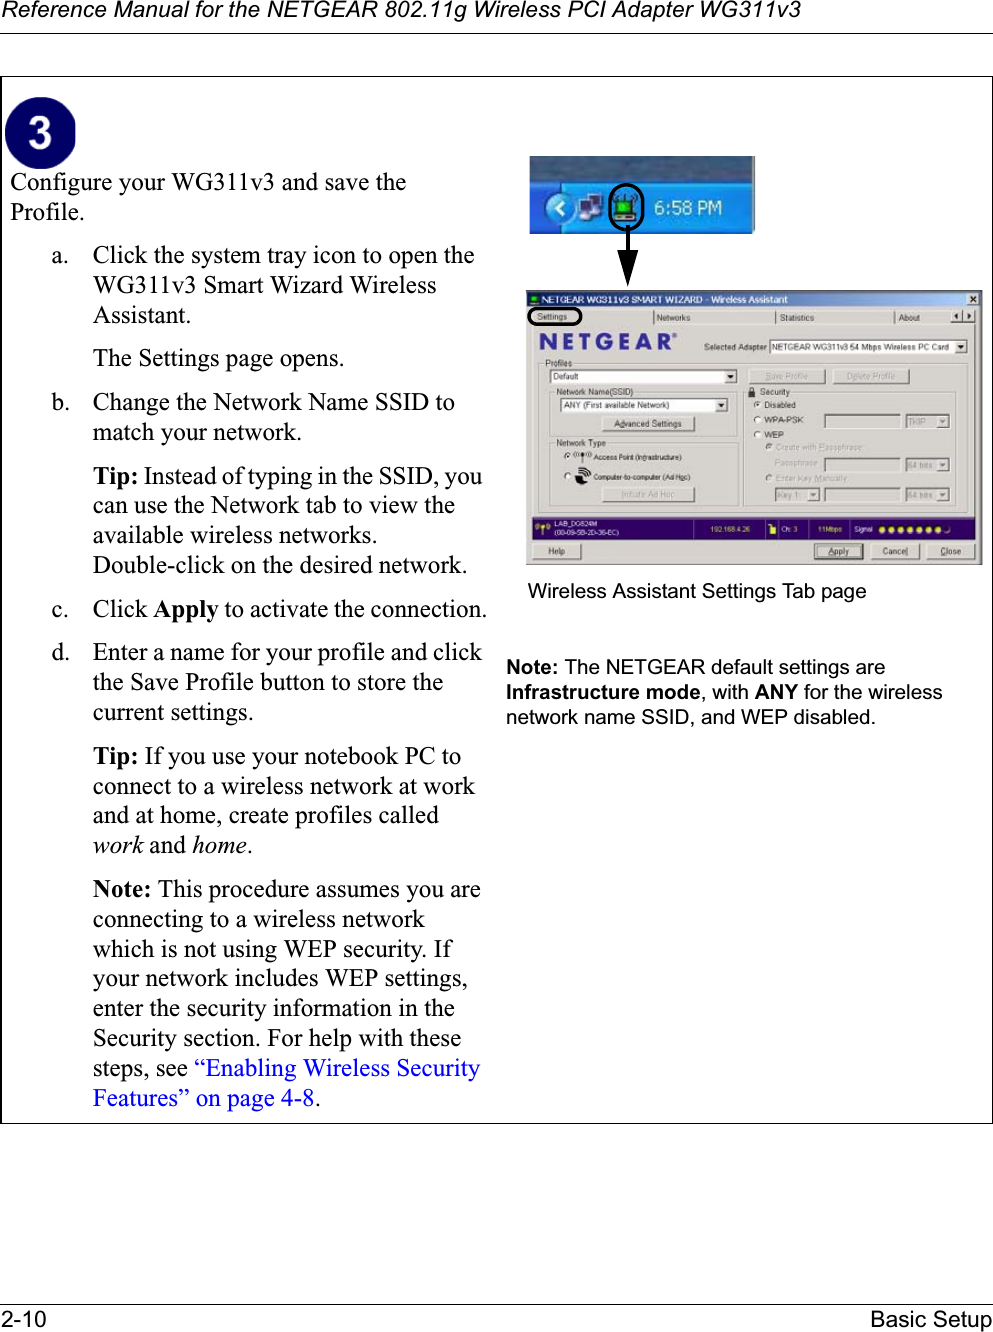 Reference Manual for the NETGEAR 802.11g Wireless PCI Adapter WG311v32-10 Basic SetupConfigure your WG311v3 and save theProfile.a. Click the system tray icon to open the WG311v3 Smart Wizard WirelessAssistant. The Settings page opens. b. Change the Network Name SSID to match your network.Tip: Instead of typing in the SSID, you can use the Network tab to view the available wireless networks. Double-click on the desired network.c. Click Apply to activate the connection.d. Enter a name for your profile and click the Save Profile button to store the current settings.Tip: If you use your notebook PC to connect to a wireless network at work and at home, create profiles called work and home.Note: This procedure assumes you are connecting to a wireless network which is not using WEP security. If your network includes WEP settings, enter the security information in the Security section. For help with these steps, see “Enabling Wireless Security Features” on page 4-8.Note: The NETGEAR default settings are Infrastructure mode, with ANY for the wireless network name SSID, and WEP disabled. Wireless Assistant Settings Tab page